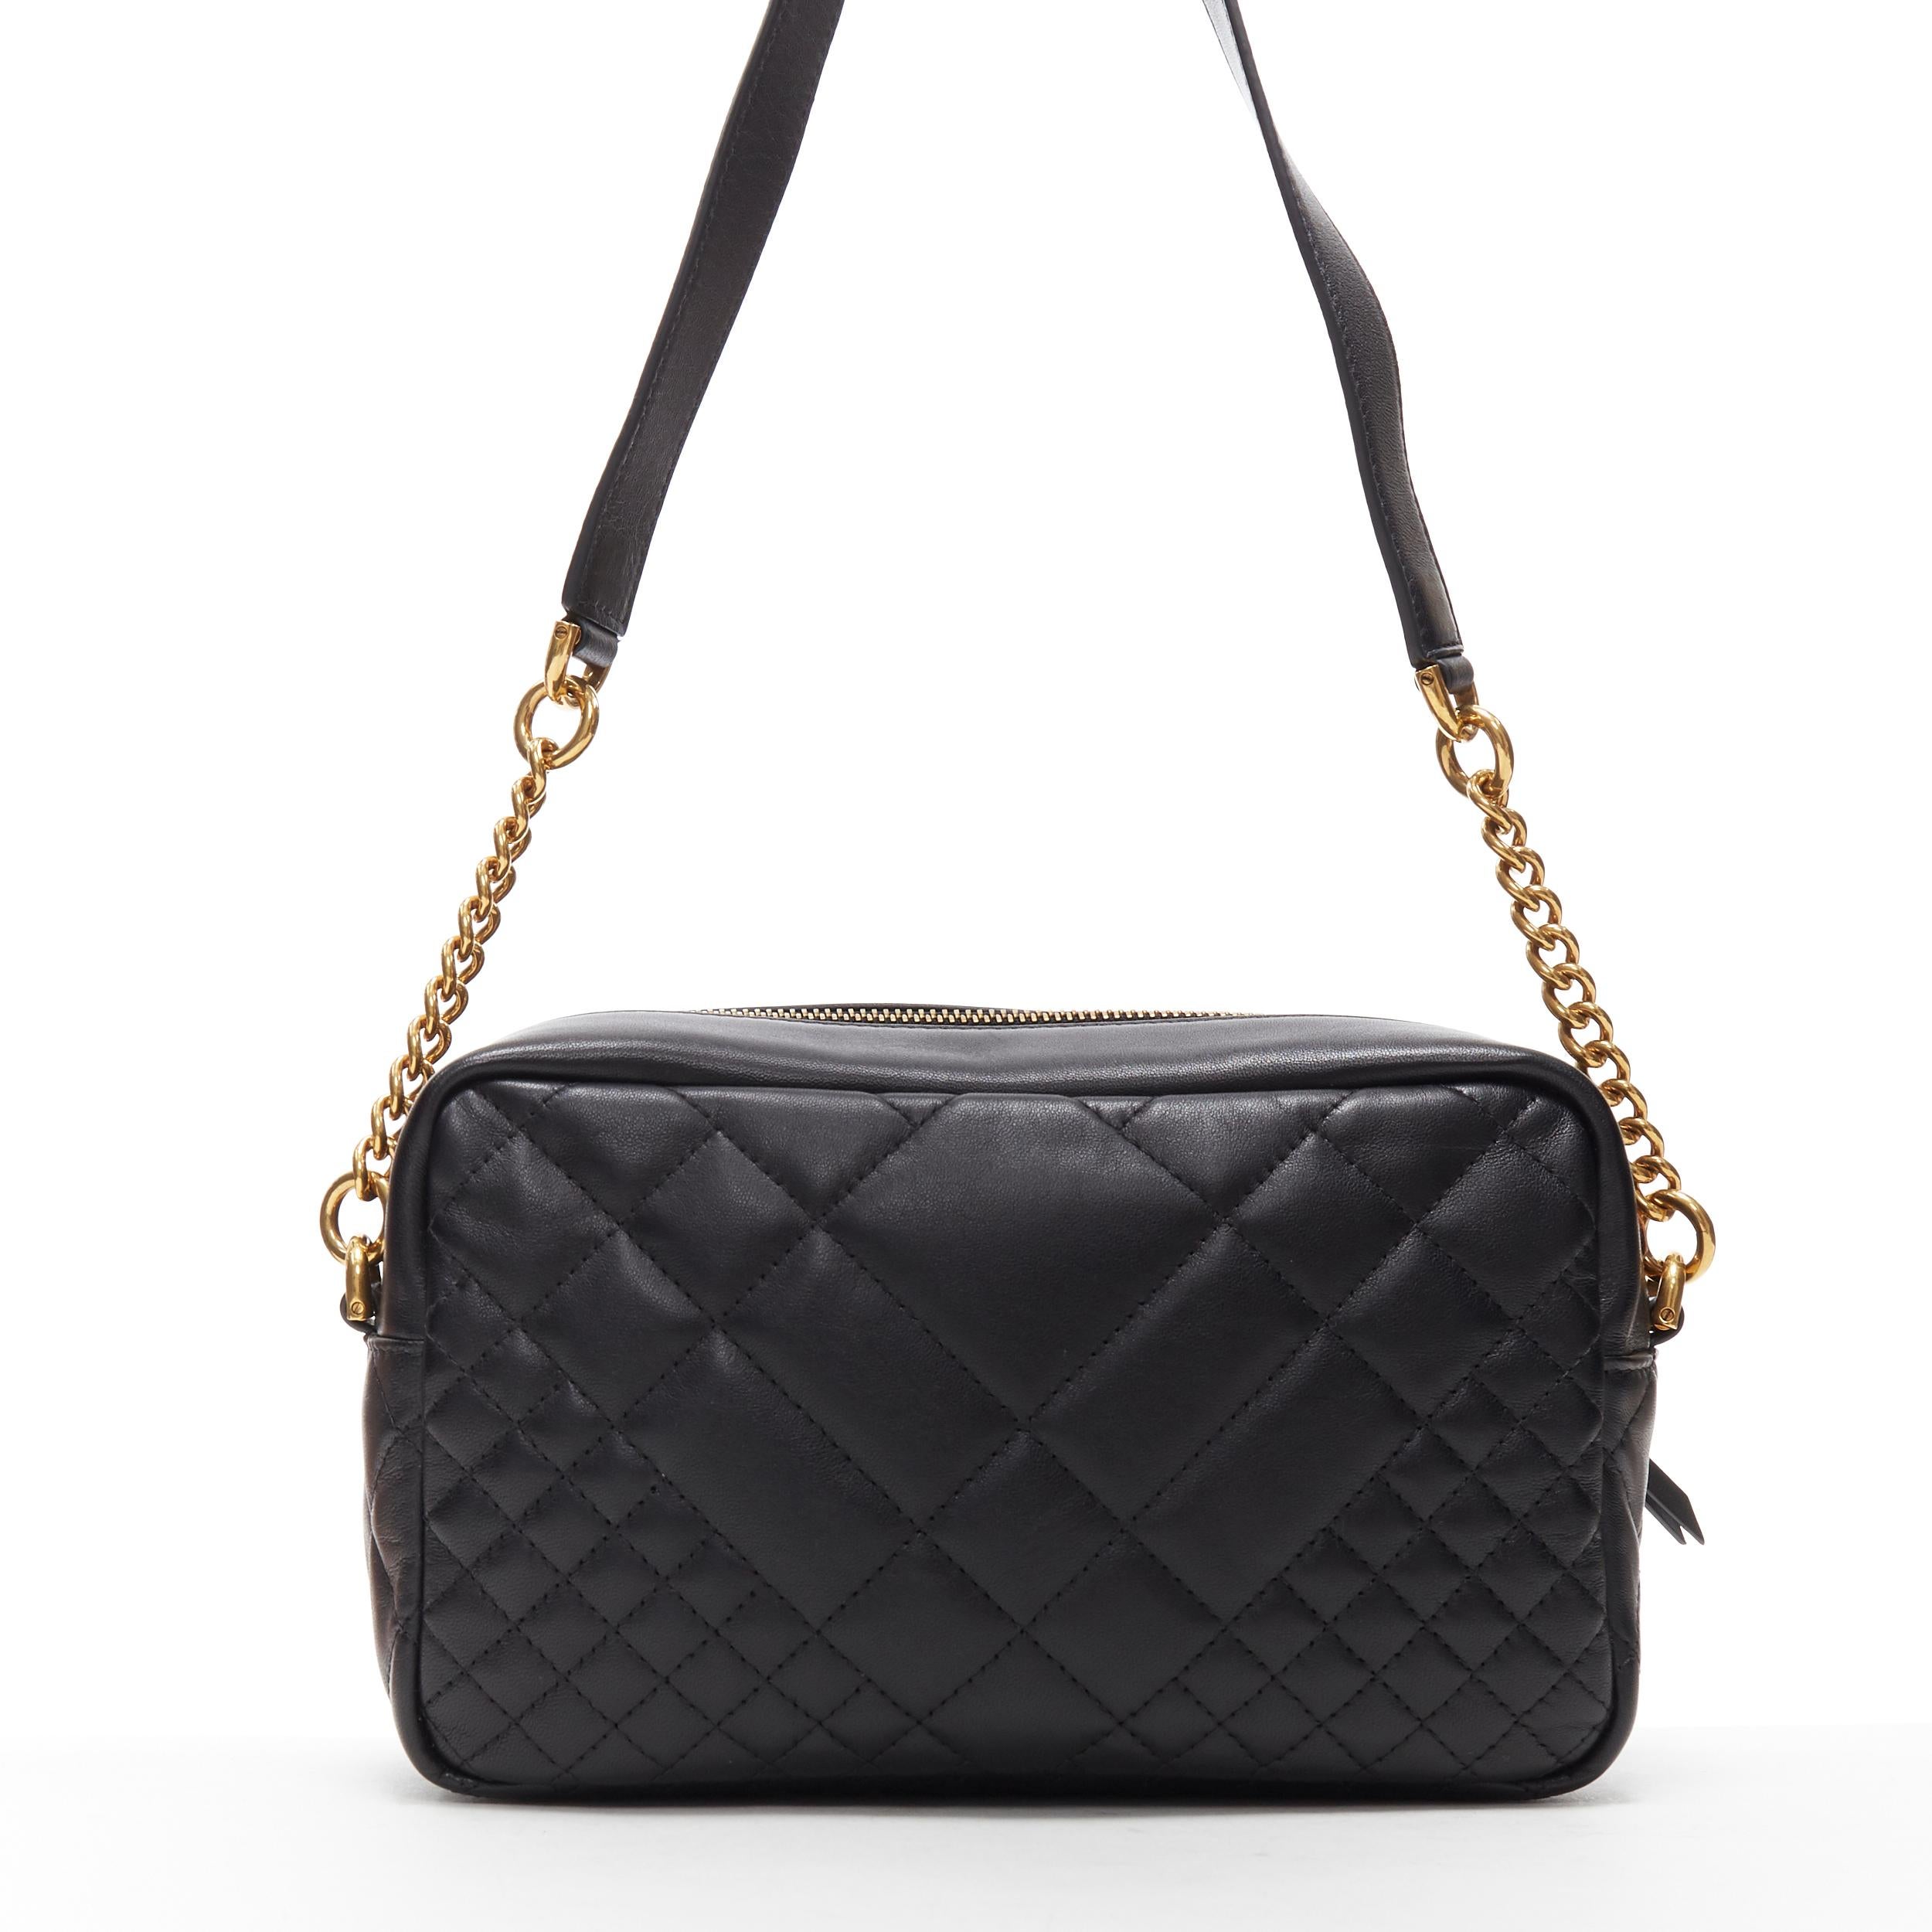 versace black bag with gold chain